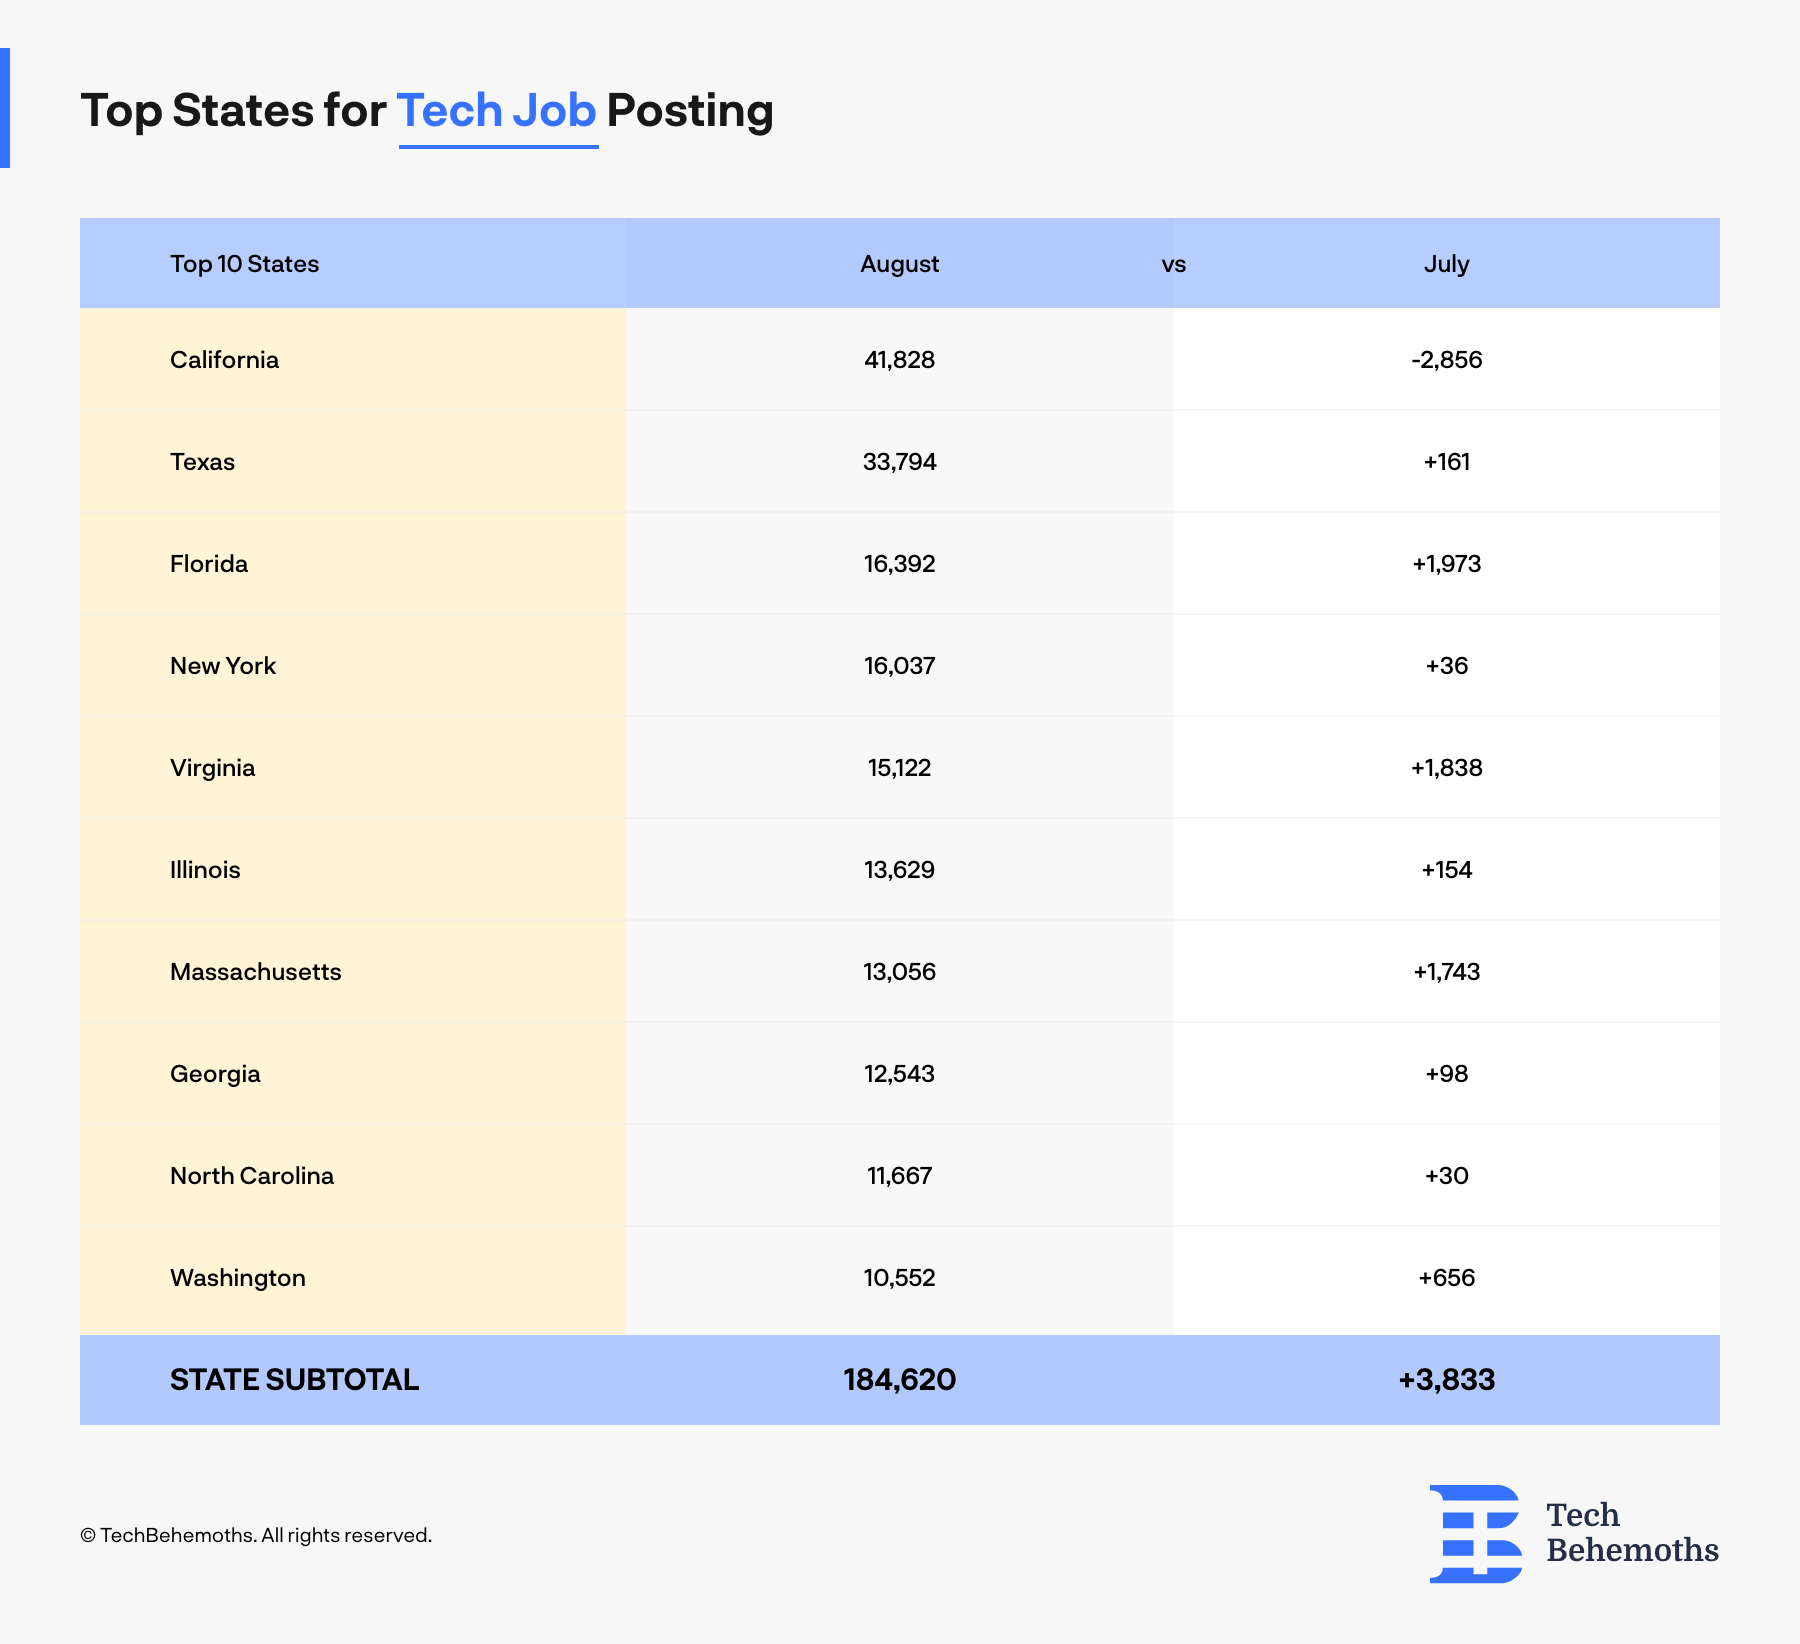 top states for tech job postings in US